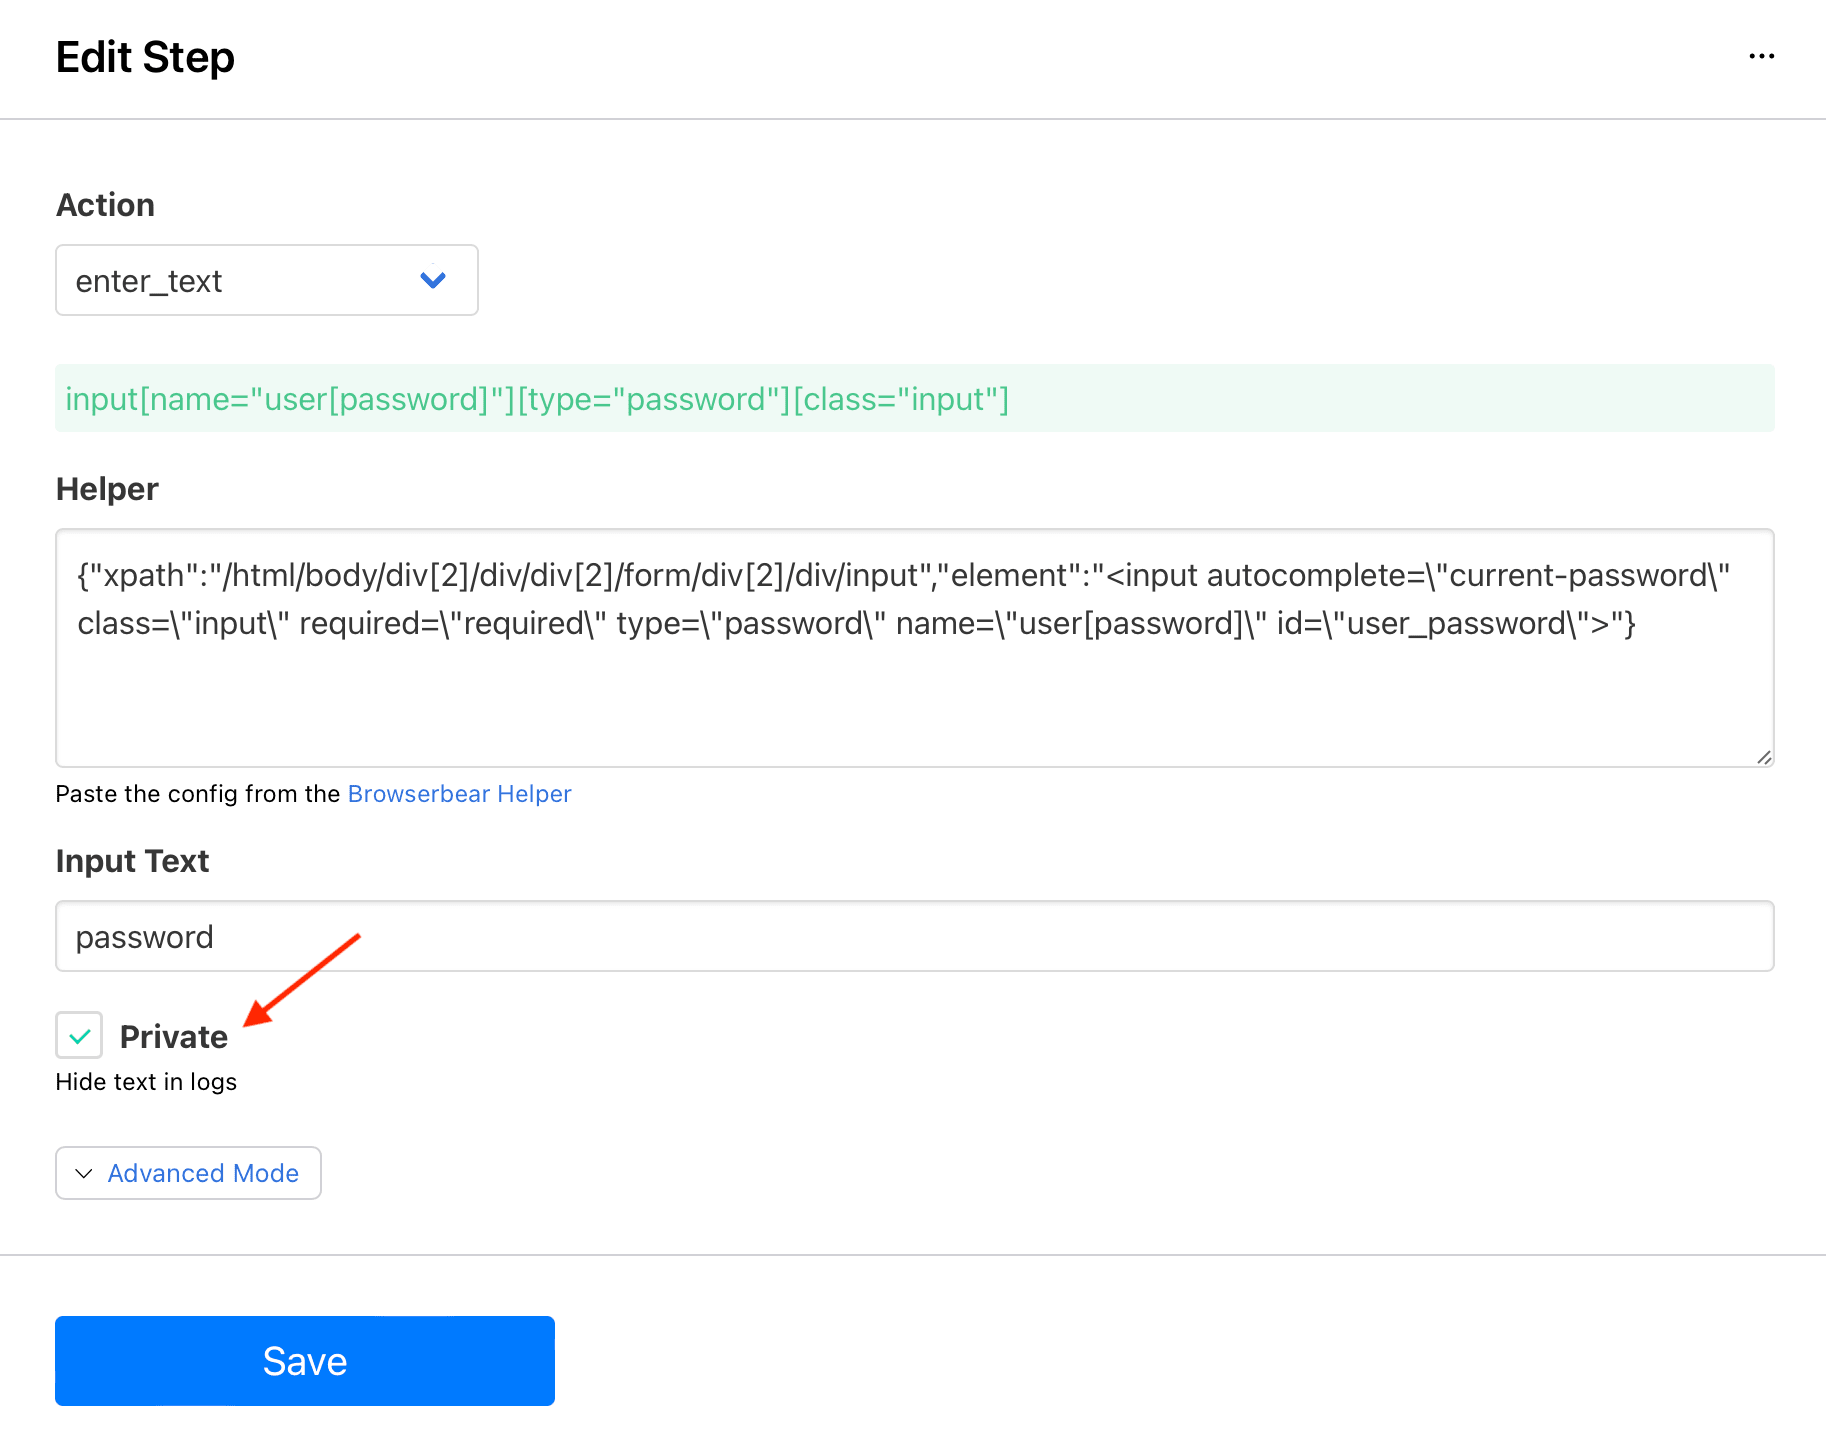 Screenshot of Browserbear enter_text action setup with red arrow pointing to private